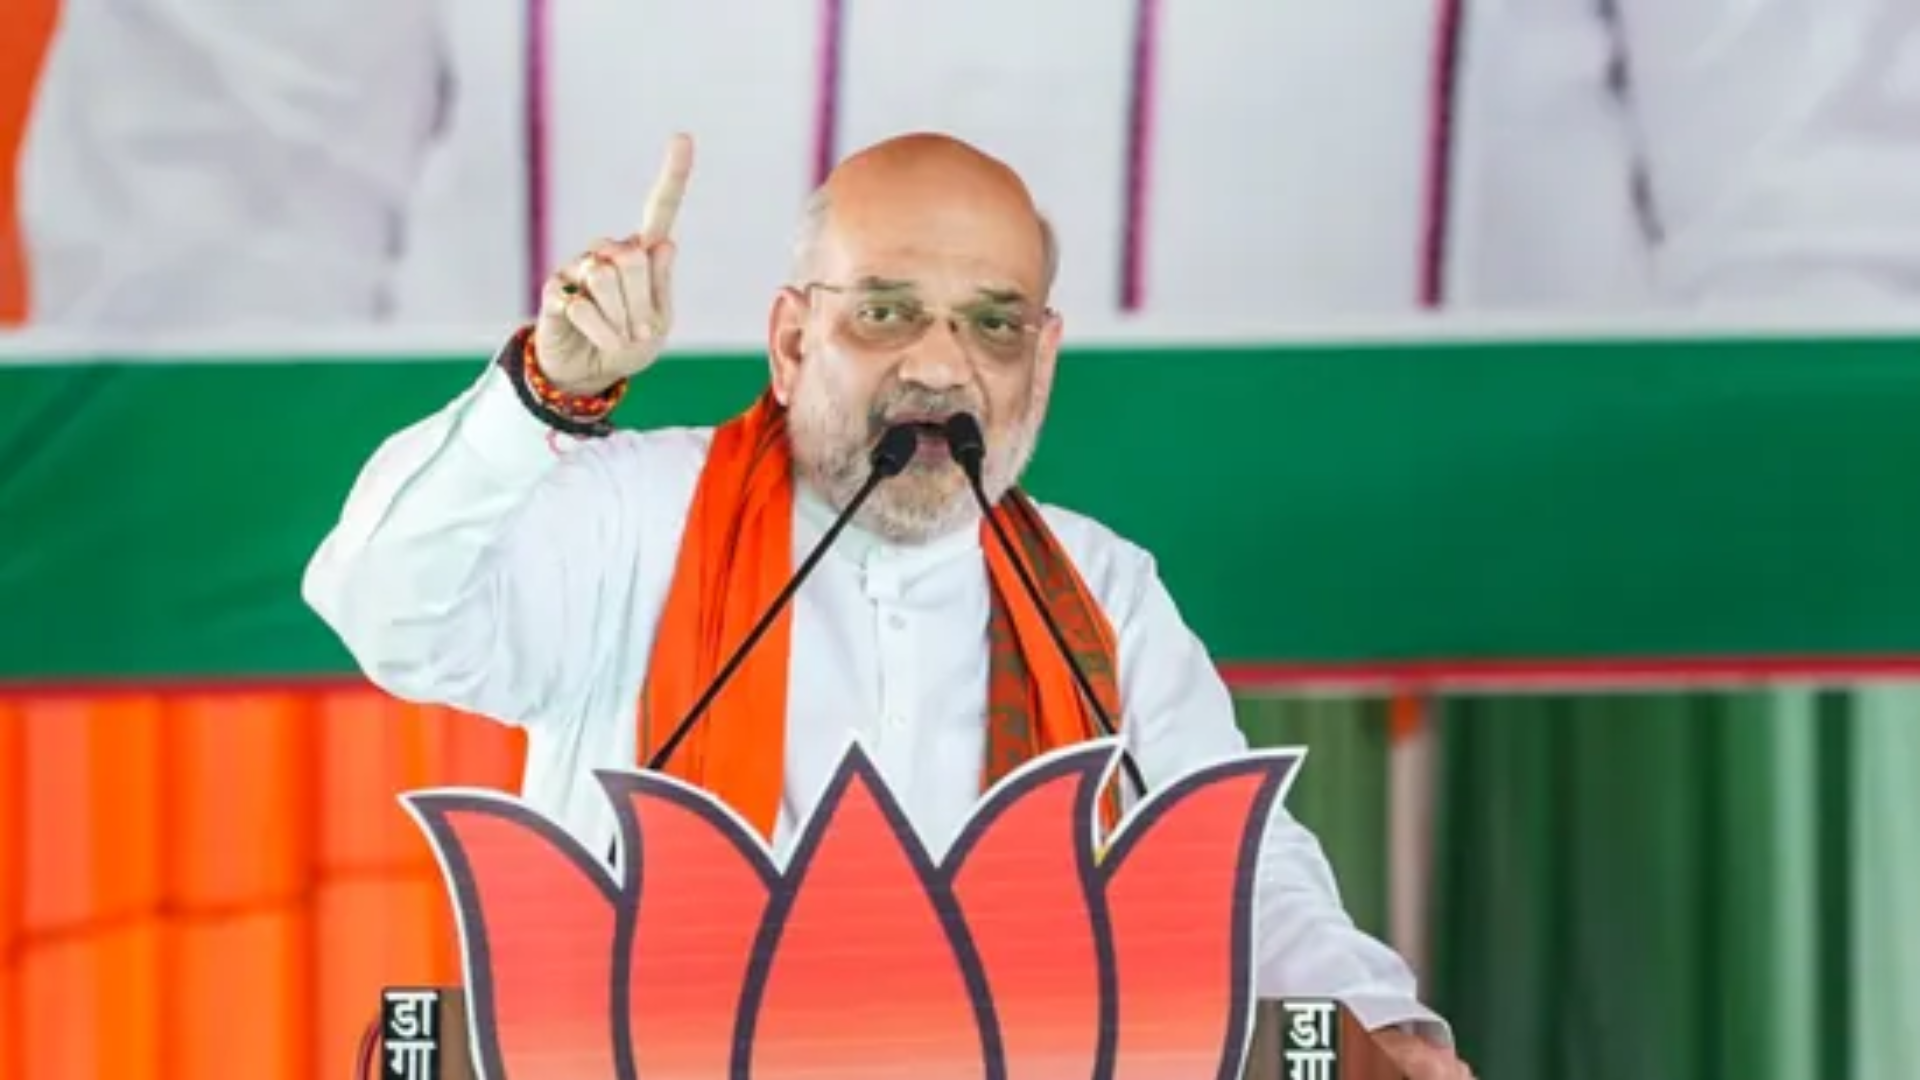 Amit Shah Targets ‘INDI Alliance’, Congress-CPI(M) ‘Illicit Relationship’ in Alappuzha Election Rally